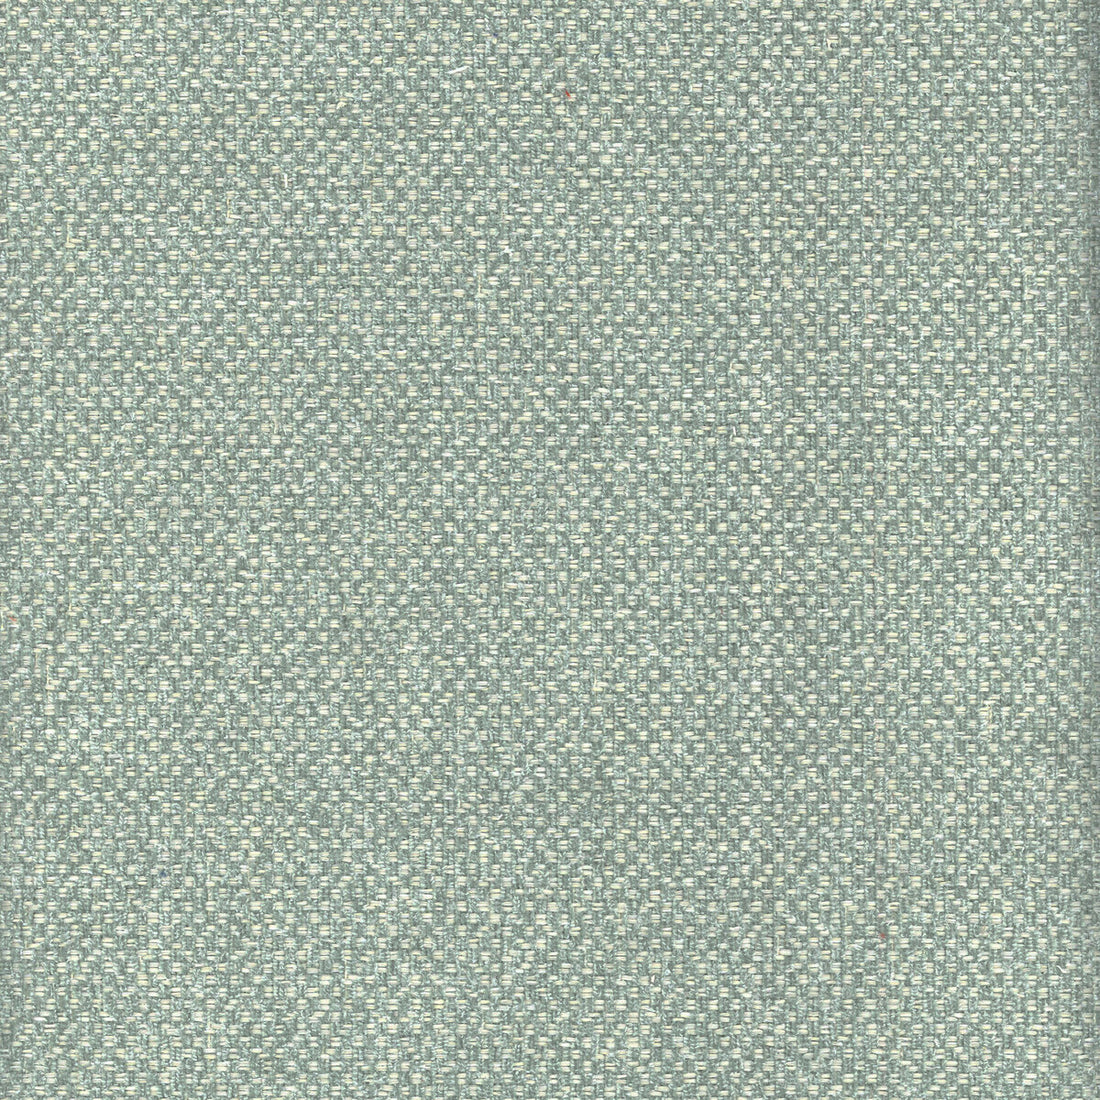 Yosemite fabric in shallow color - pattern AM100332.113.0 - by Kravet Couture in the Andrew Martin Canyon collection